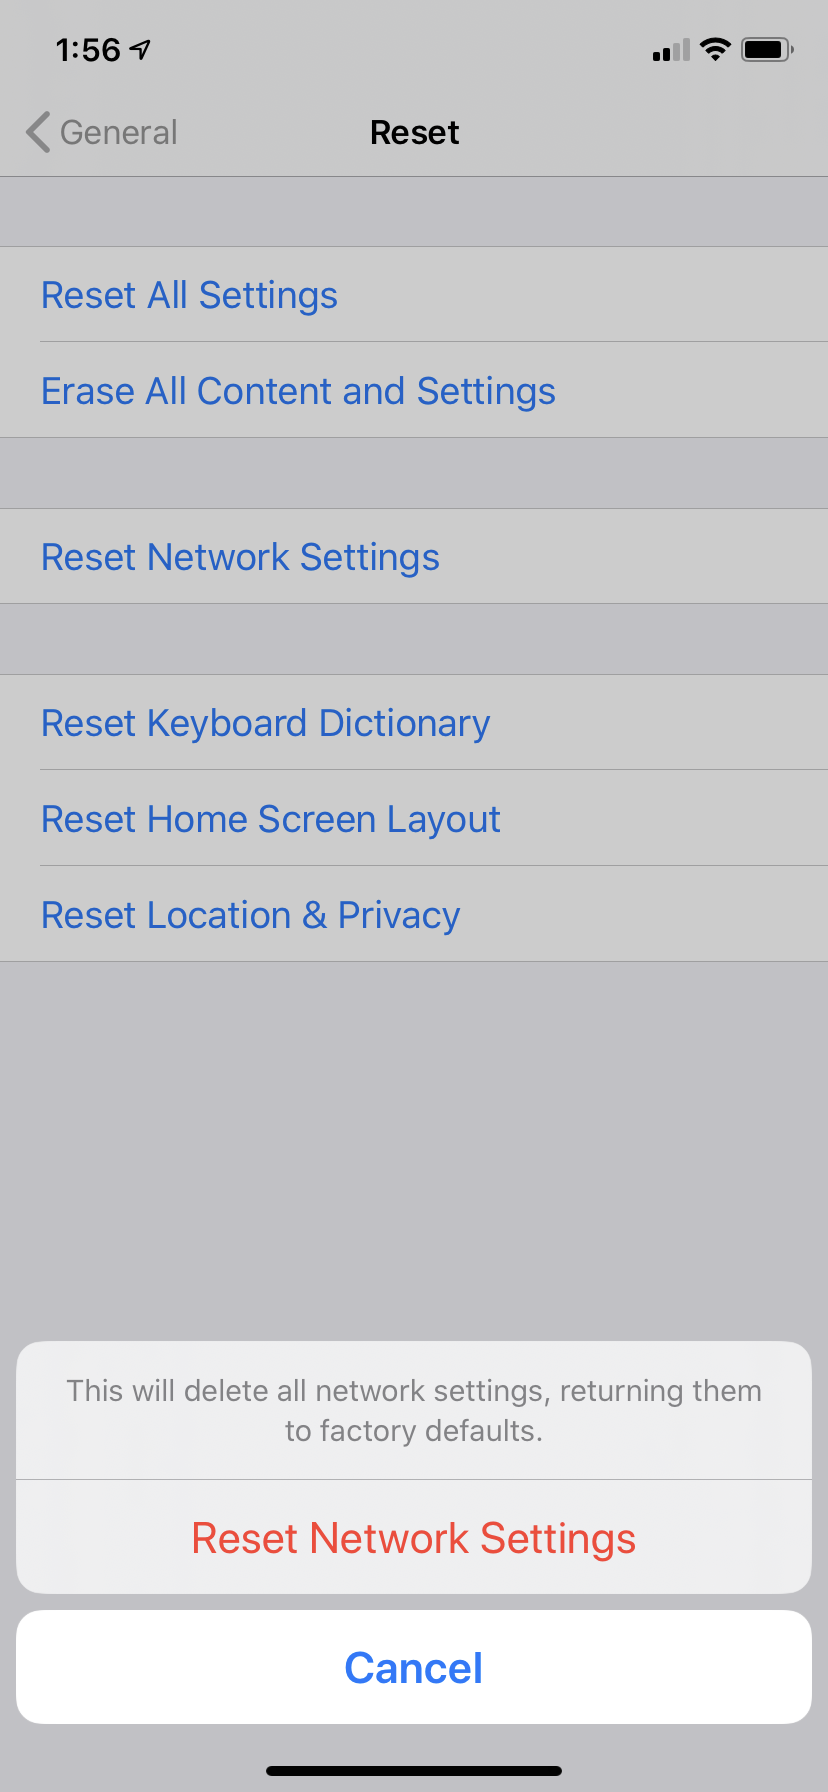 confirm that you want to Reset Network Settings